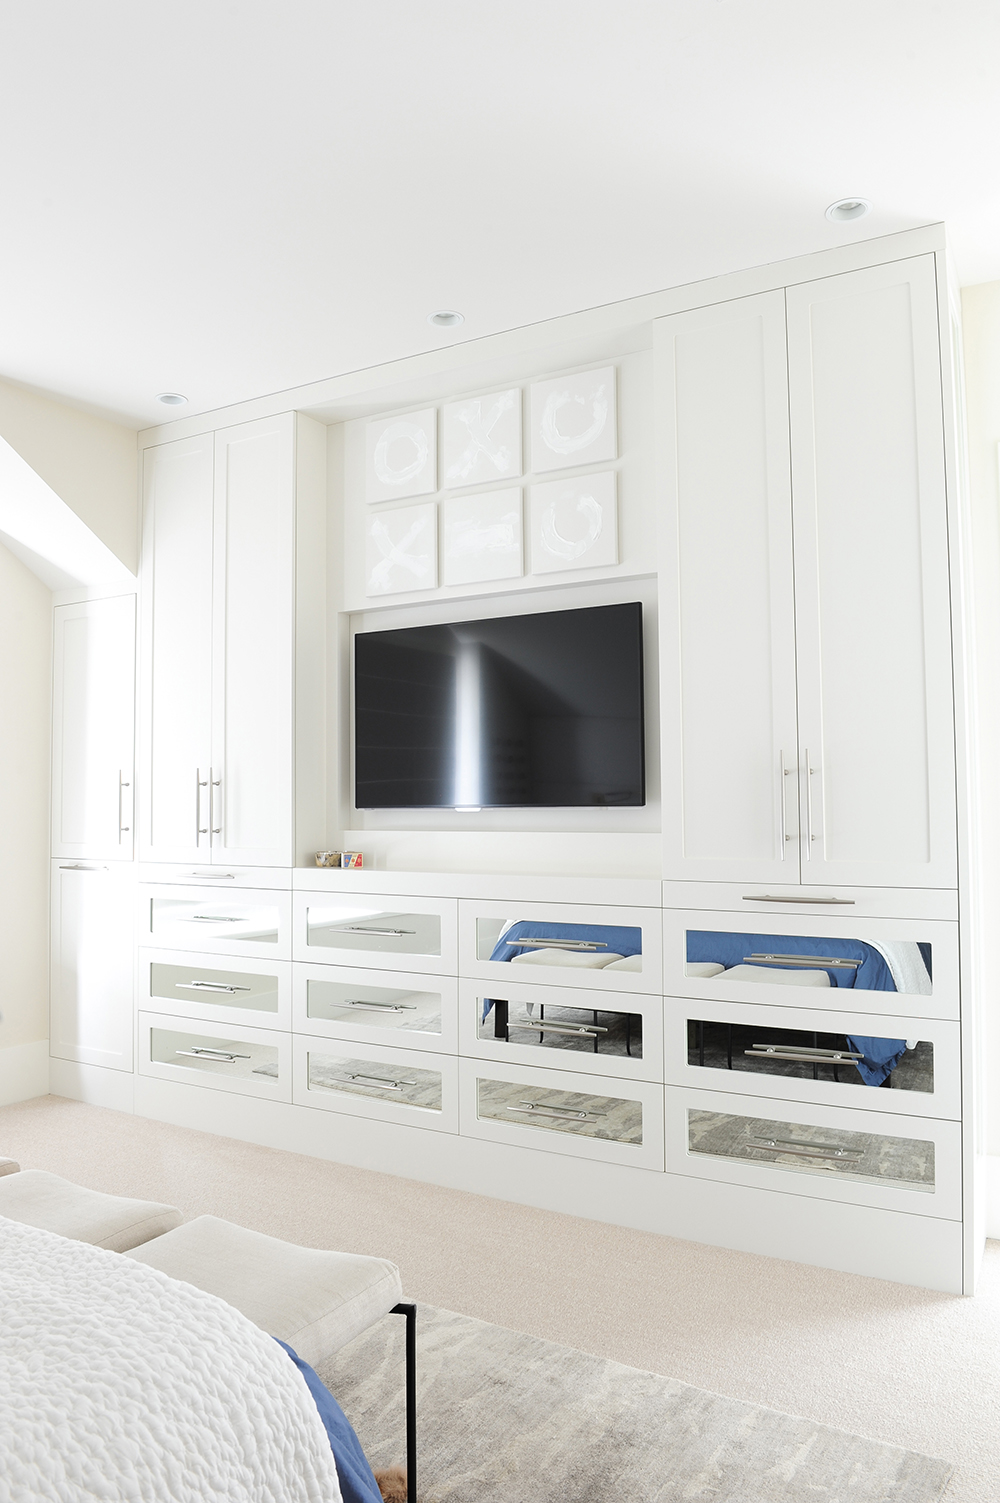 A large white built-in dresser with mirrored drawers visually expands the master bedroom.